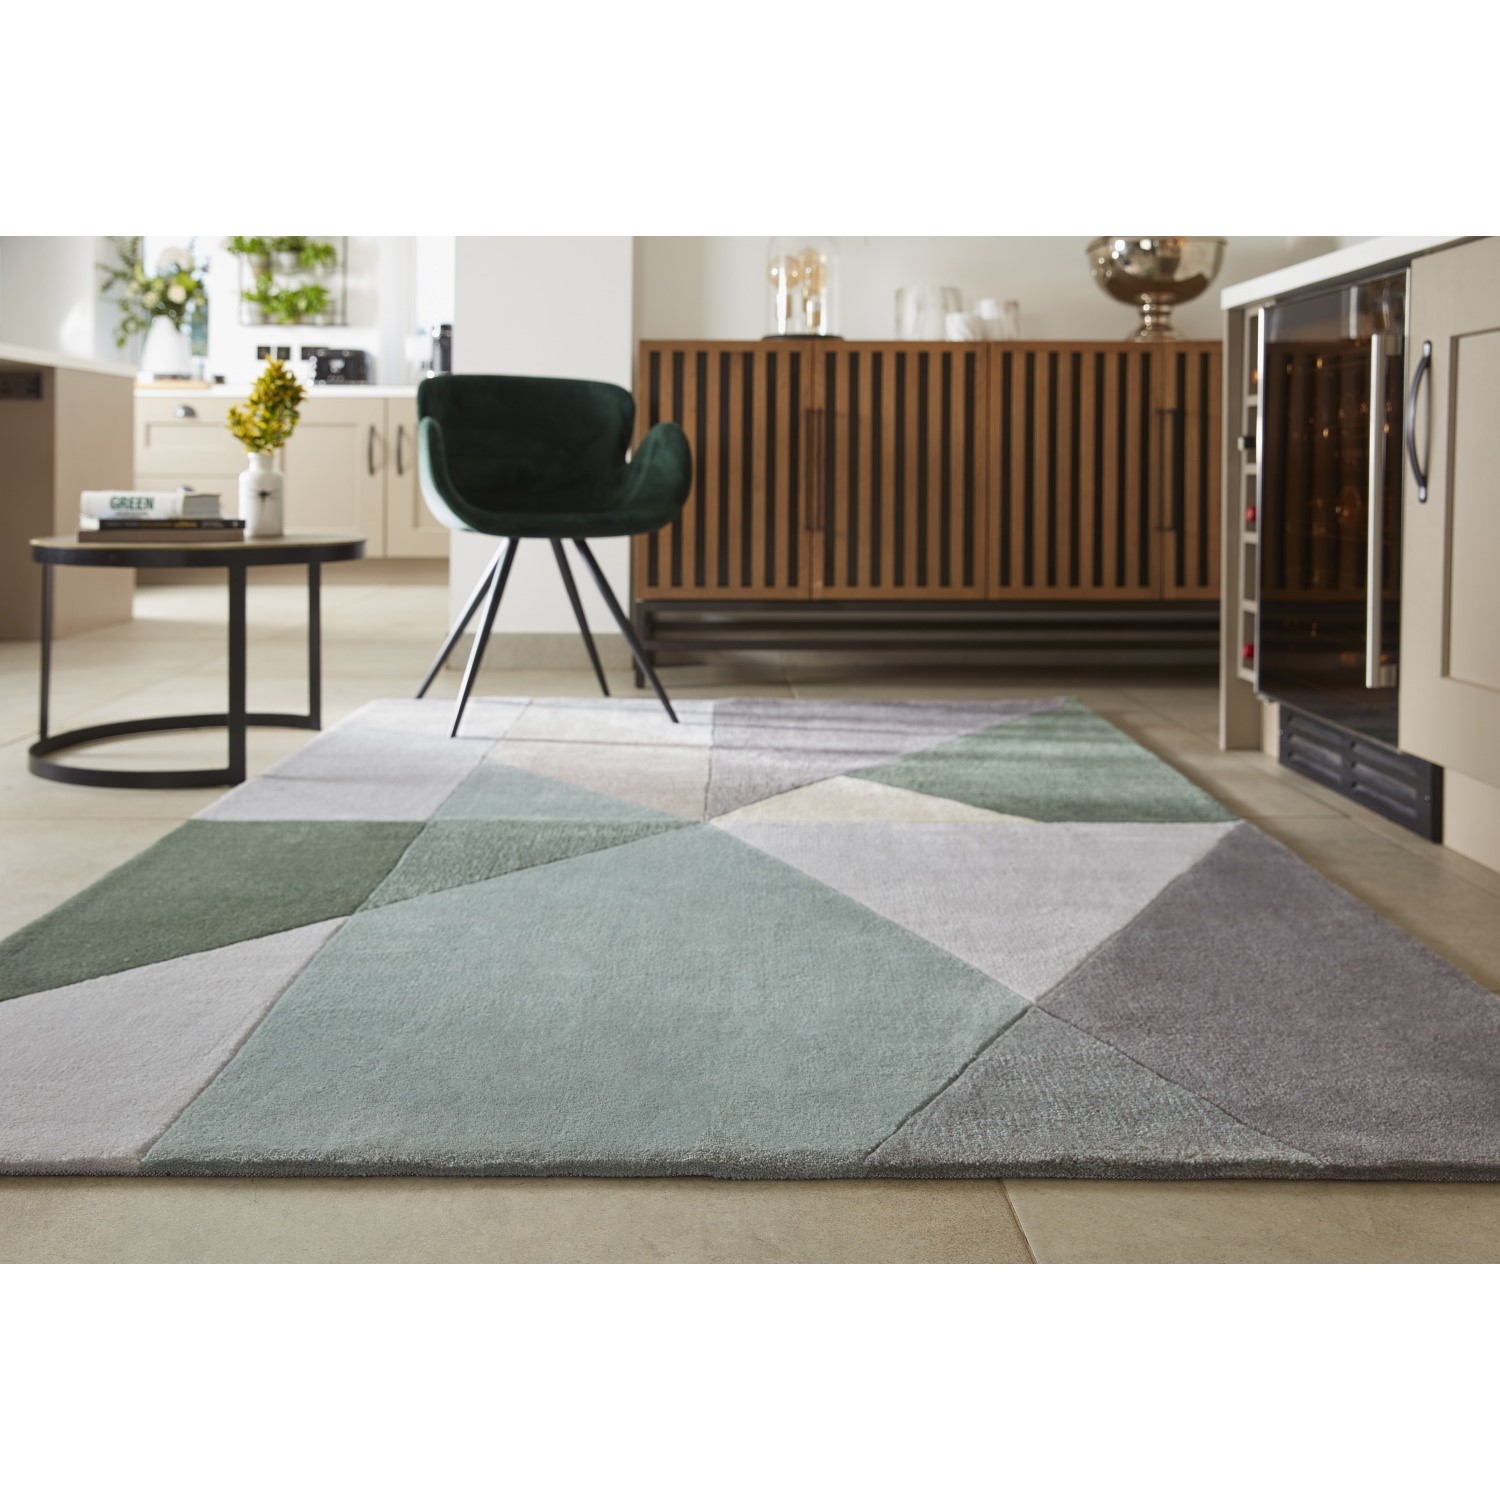 Read more about Multi coloured patterned rug 120x170cm origins